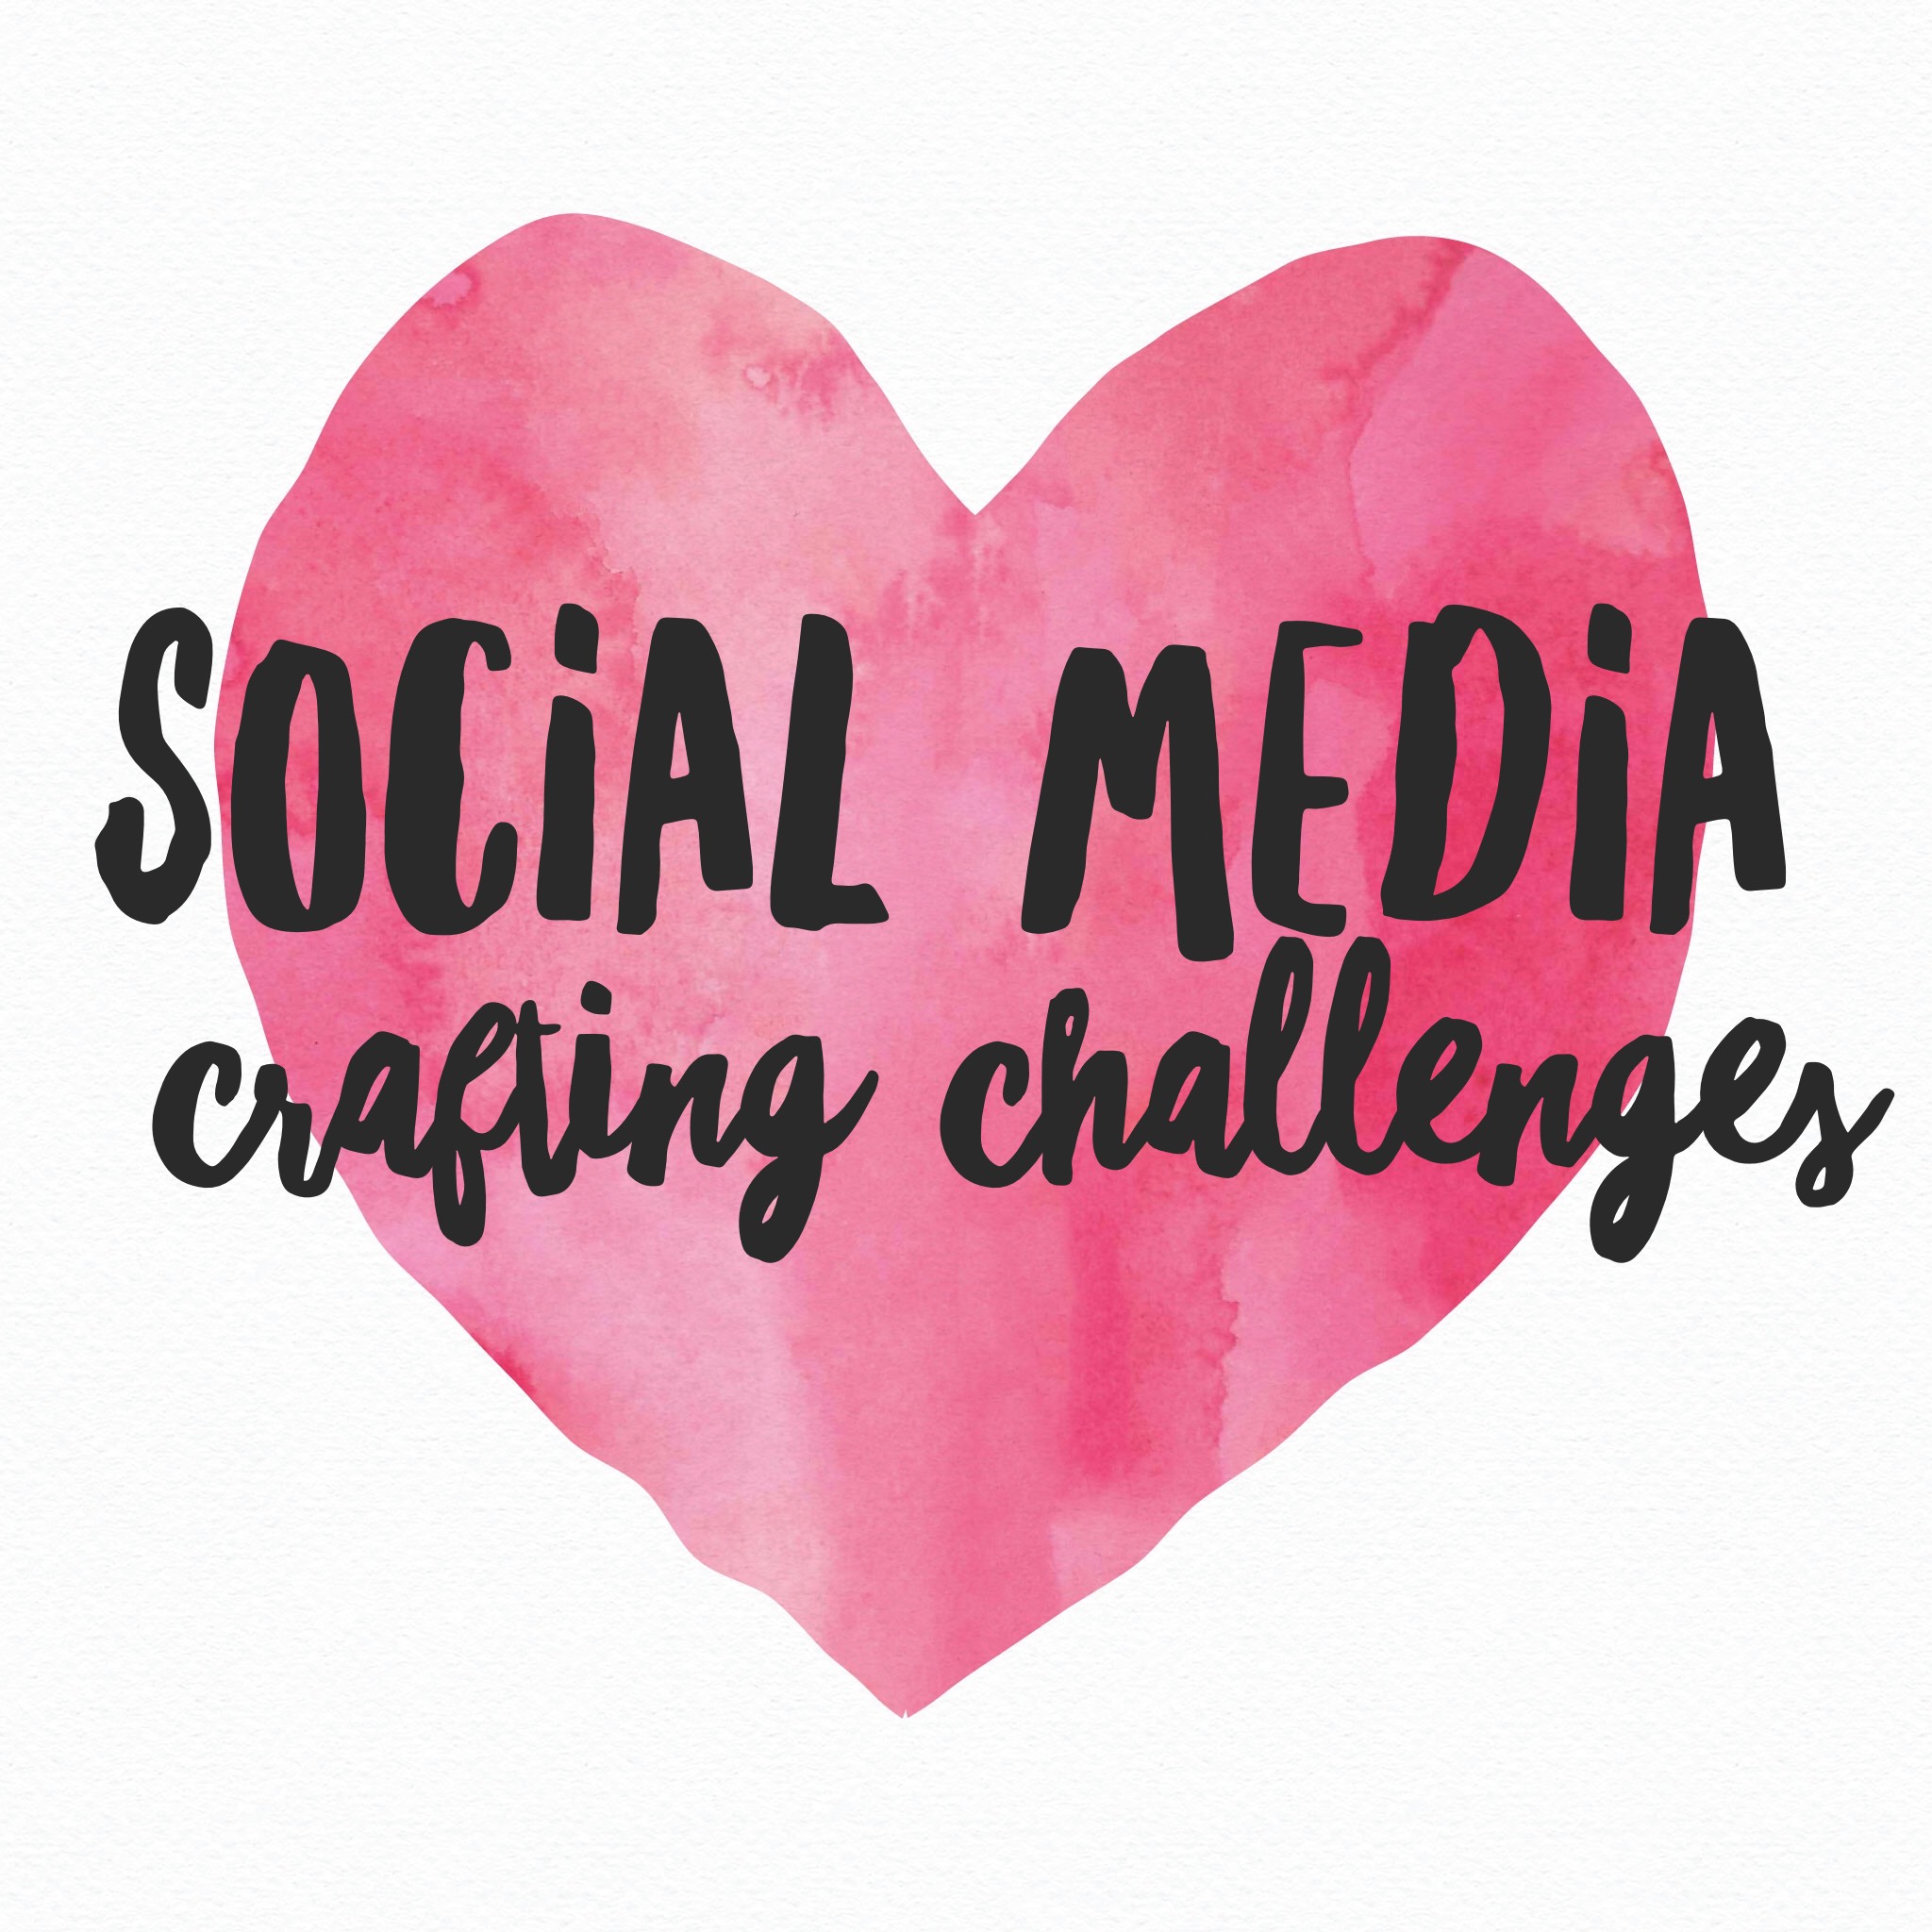 3 February Crafting Challenges: Hashtag to join!